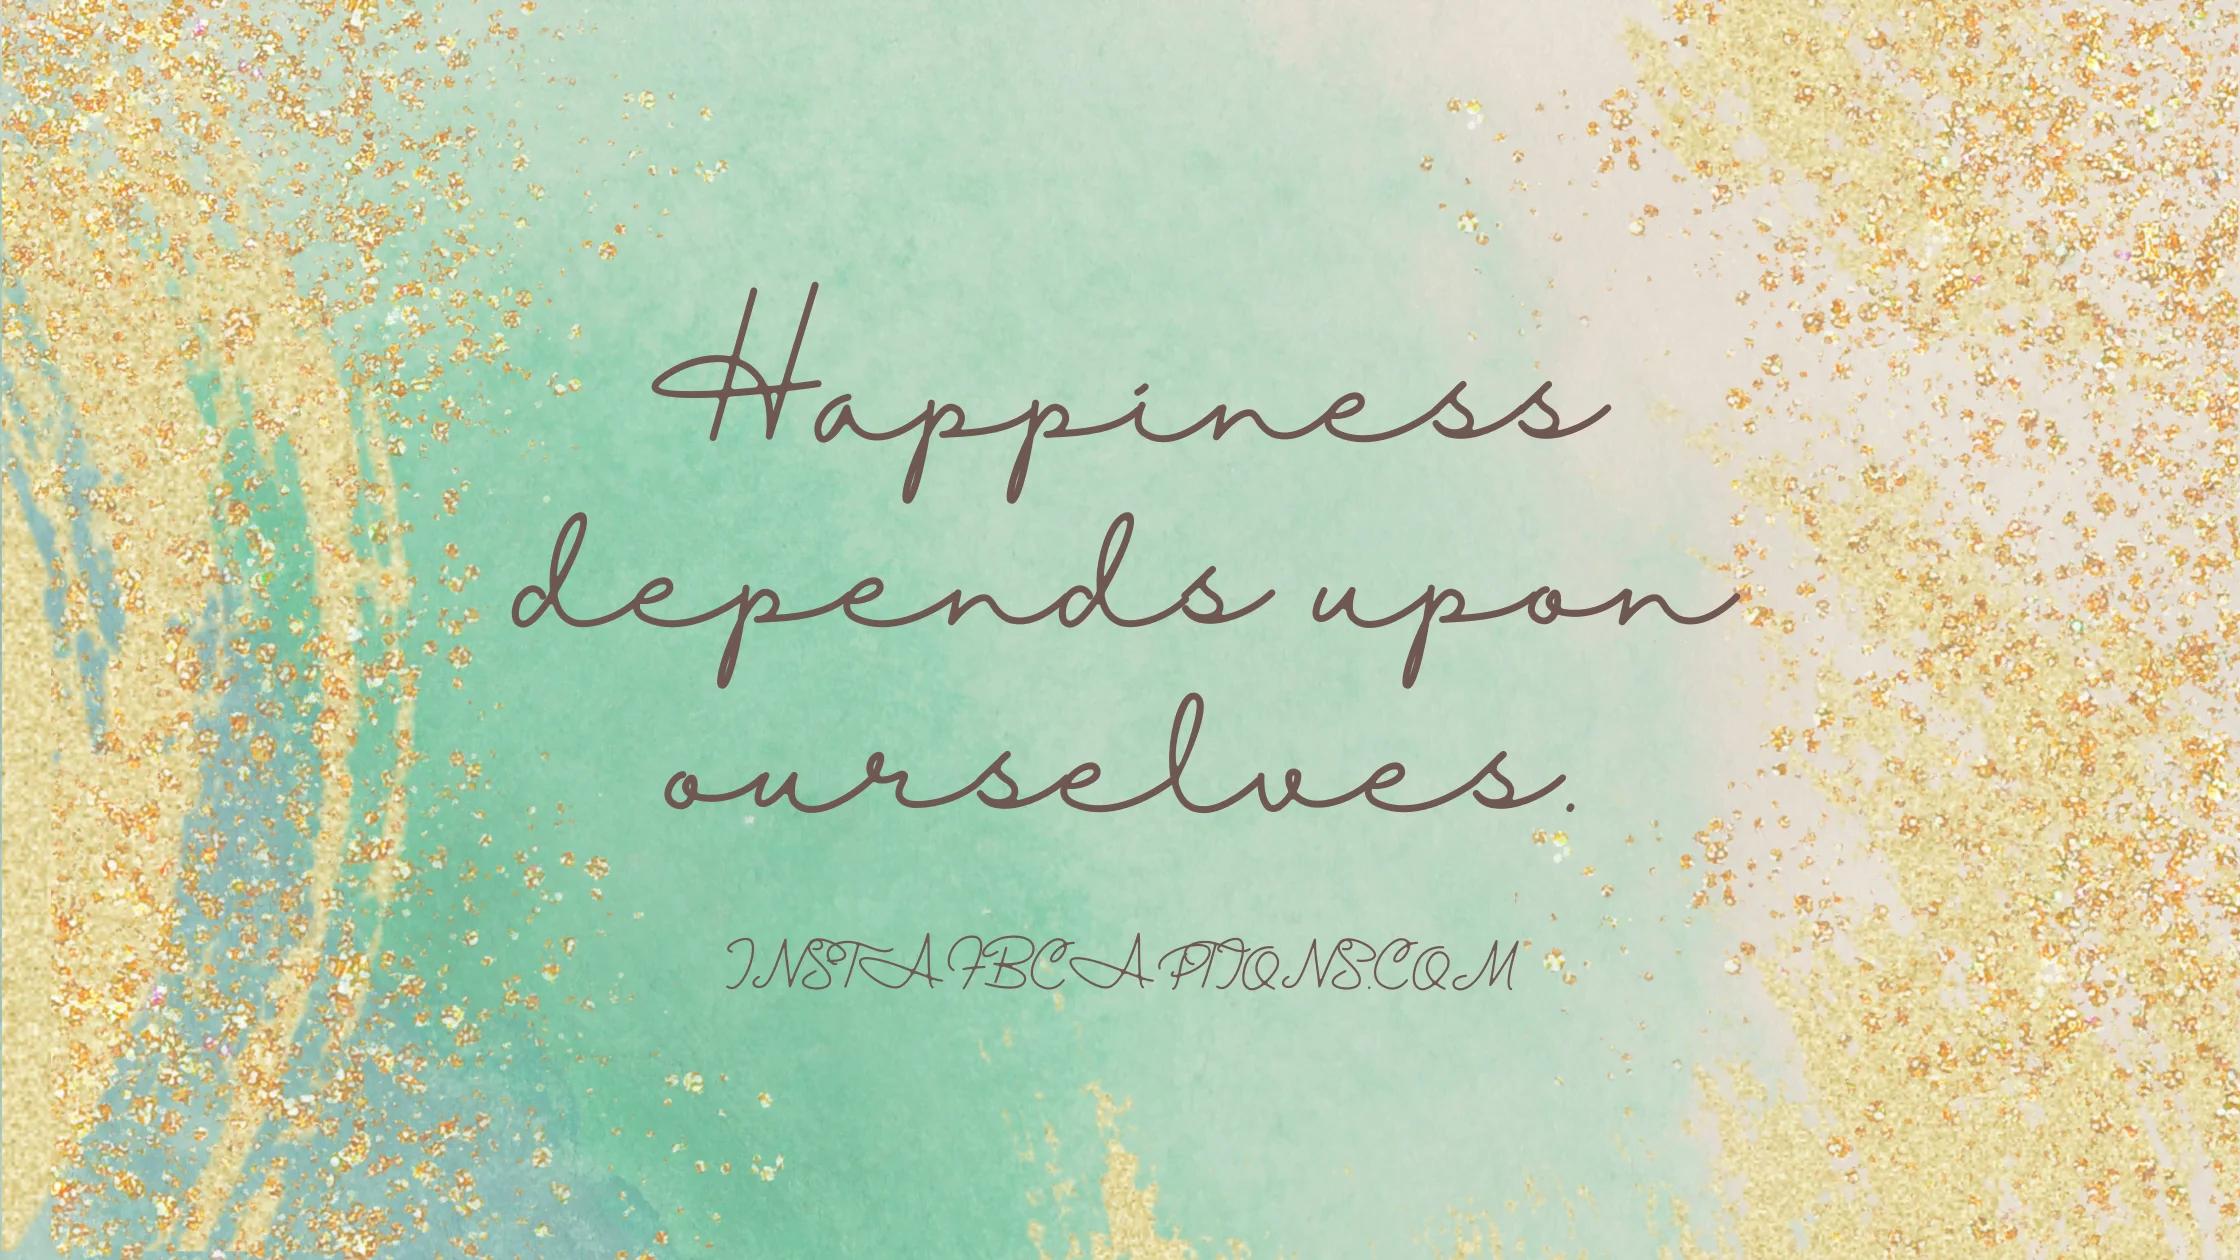 Happiness depends upon ourselves.  - Motivational Quotes for Instagram Bios - [Motivational] Captions For Positive Instagram Posts in 2023